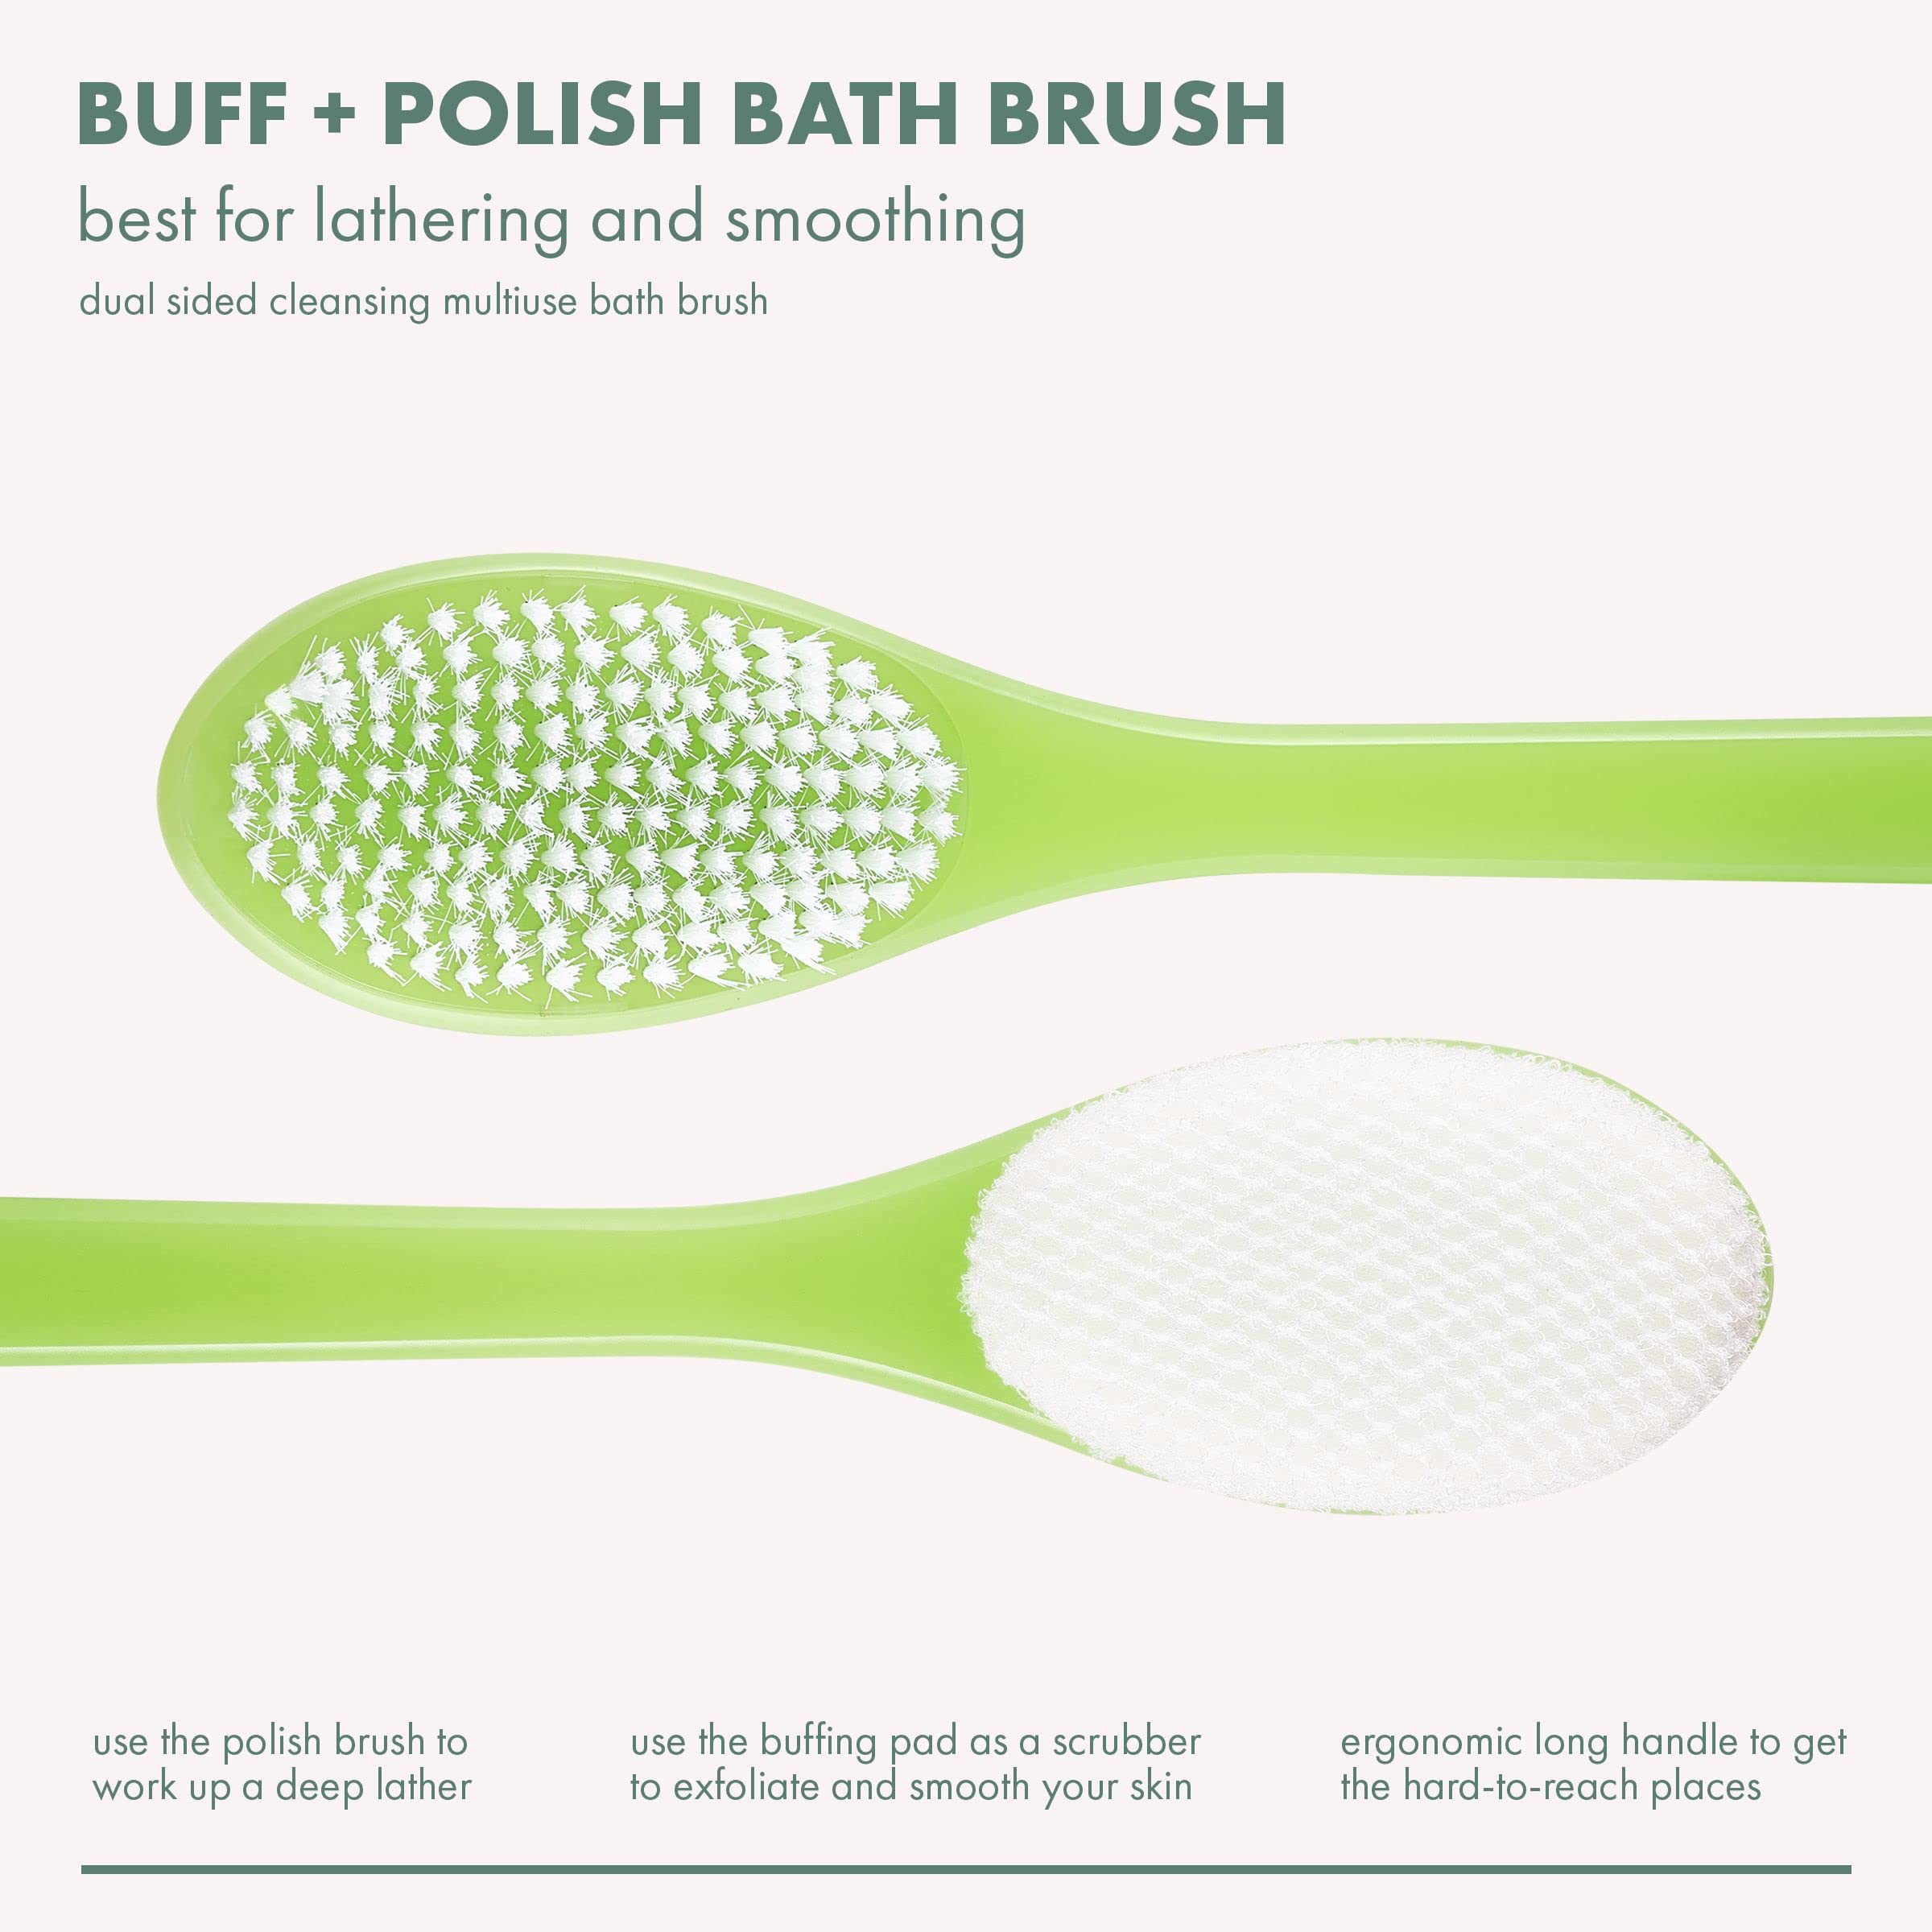 EcoTools Buff and Polish Bath Brush, Exfoliating & Promotes Blood Circulation, Dual Sided Brush for Healthy Looking Skin, Bath & Shower Body Brush, For Men & Women, Green, 1 Count